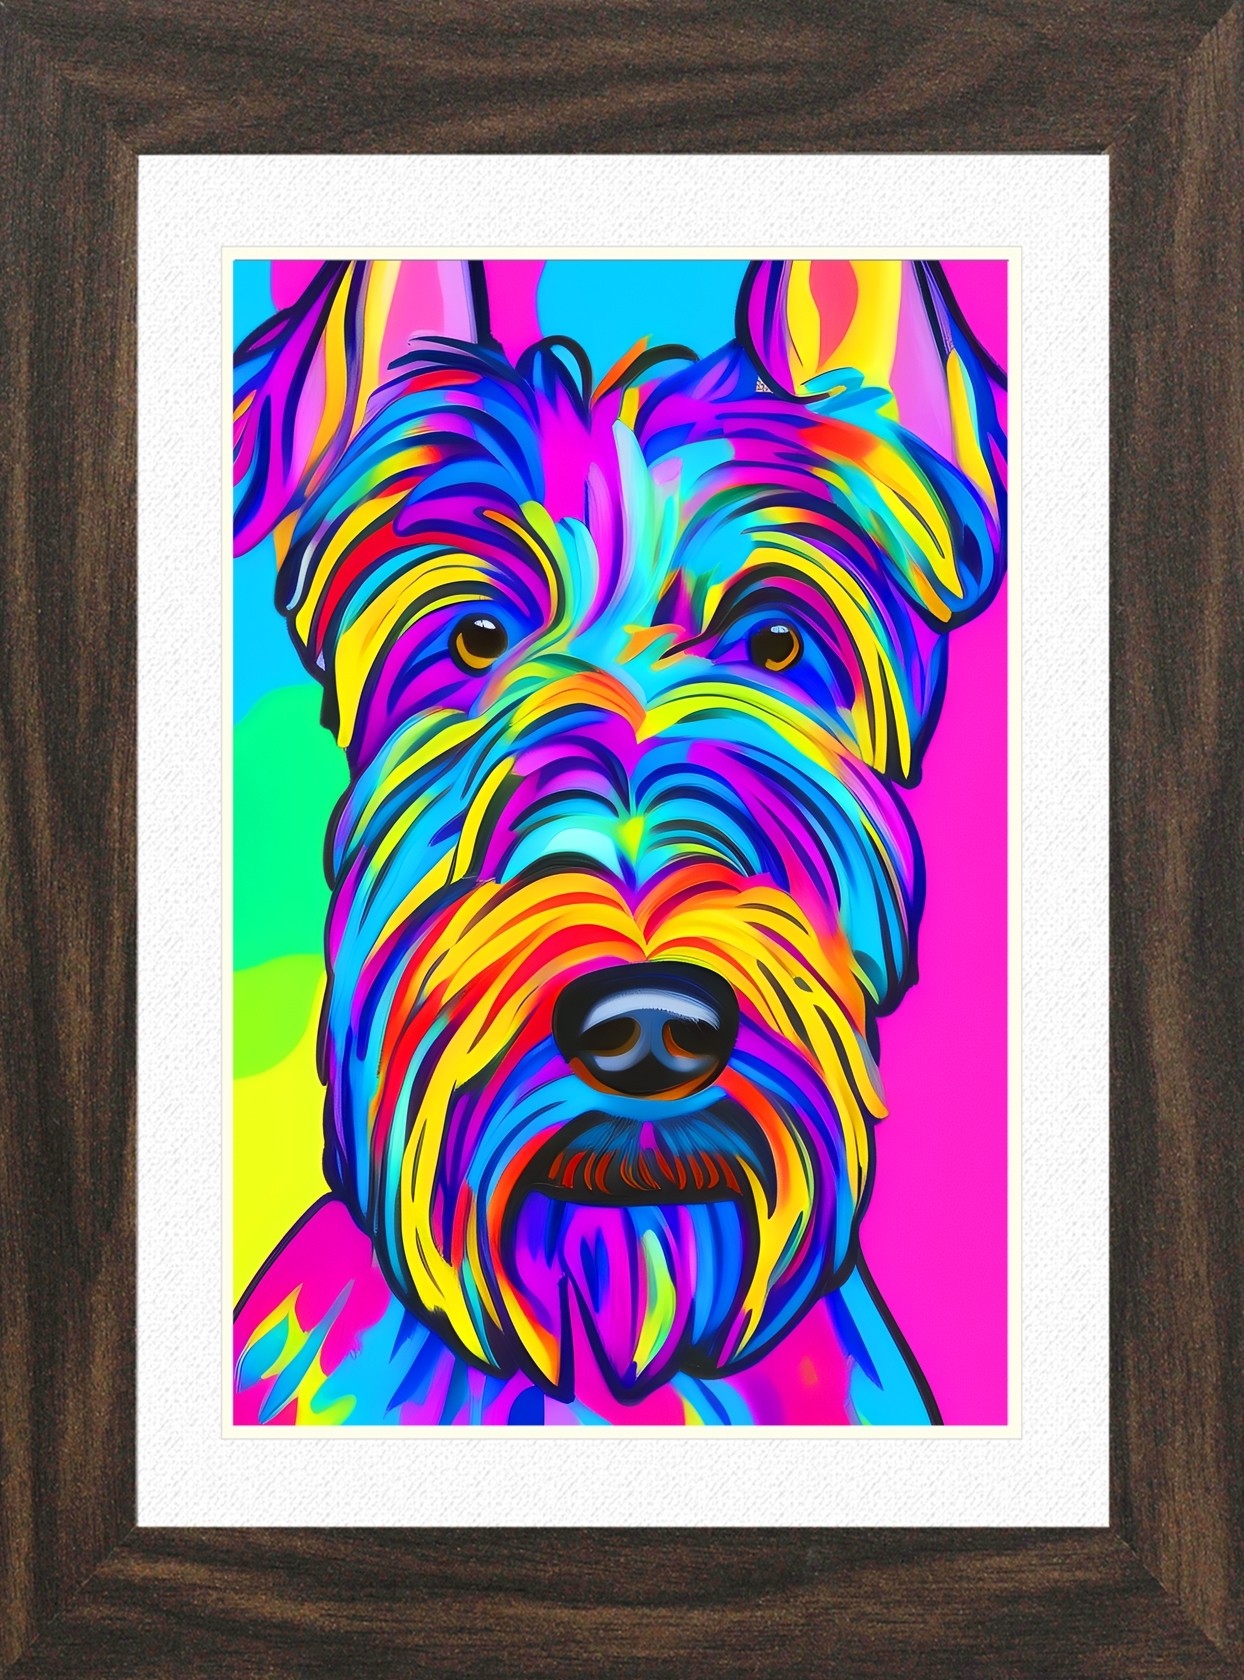 Scottish Terrier Dog Picture Framed Colourful Abstract Art (A3 Walnut Frame)